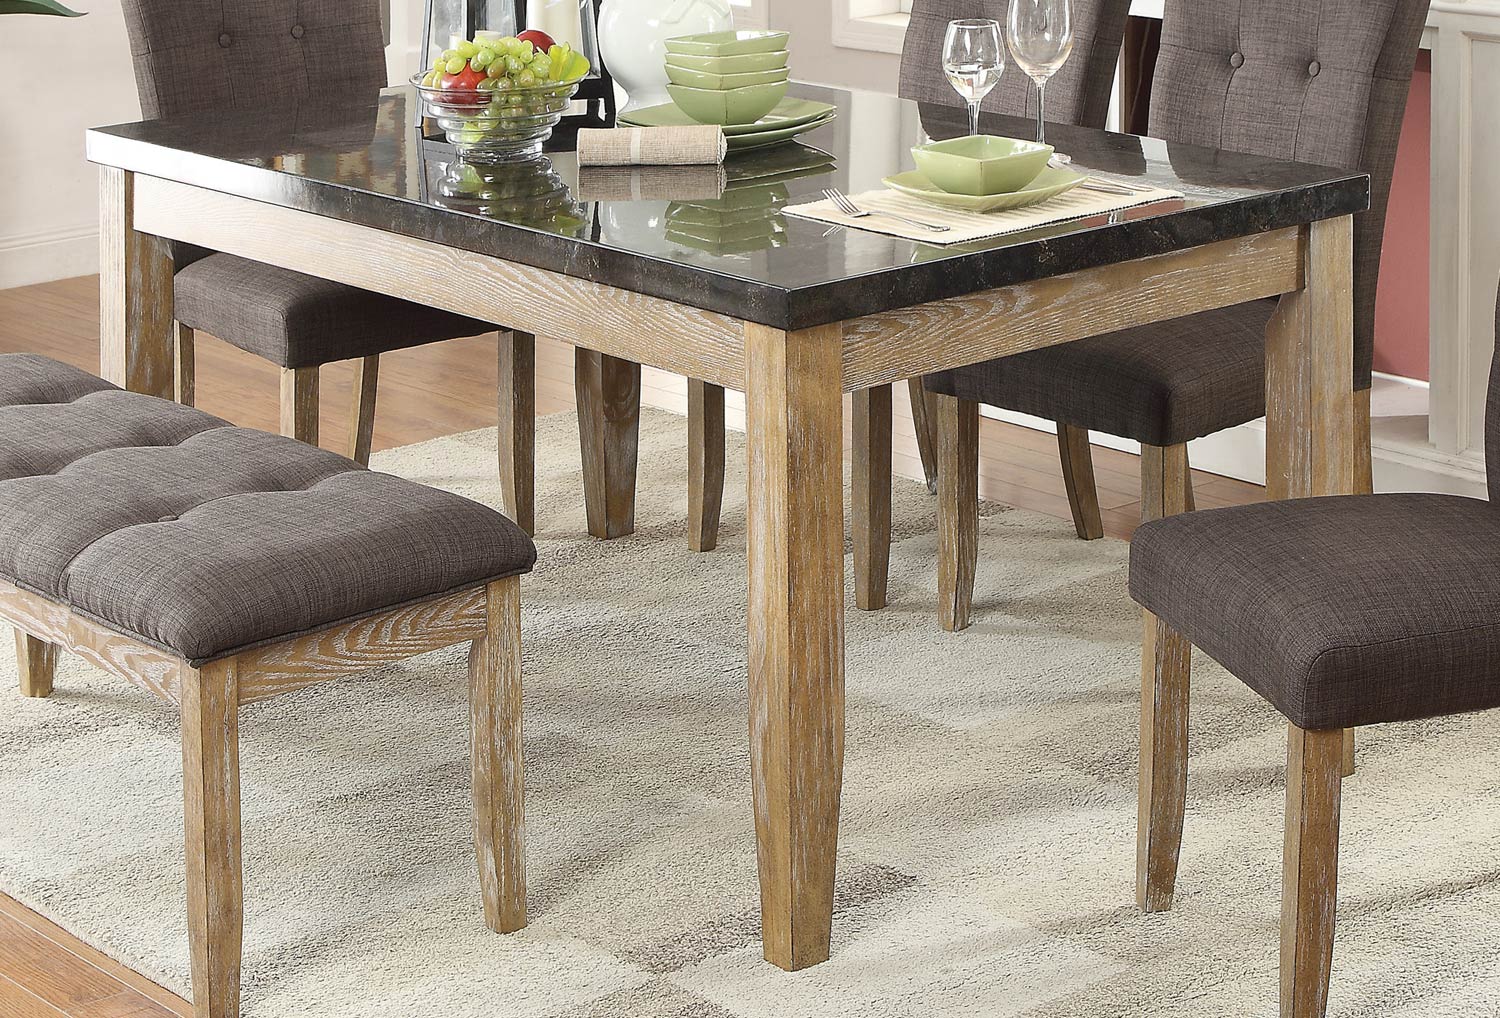 Homelegance Huron Dining Table - Faux Marble Top - Weathered Wood